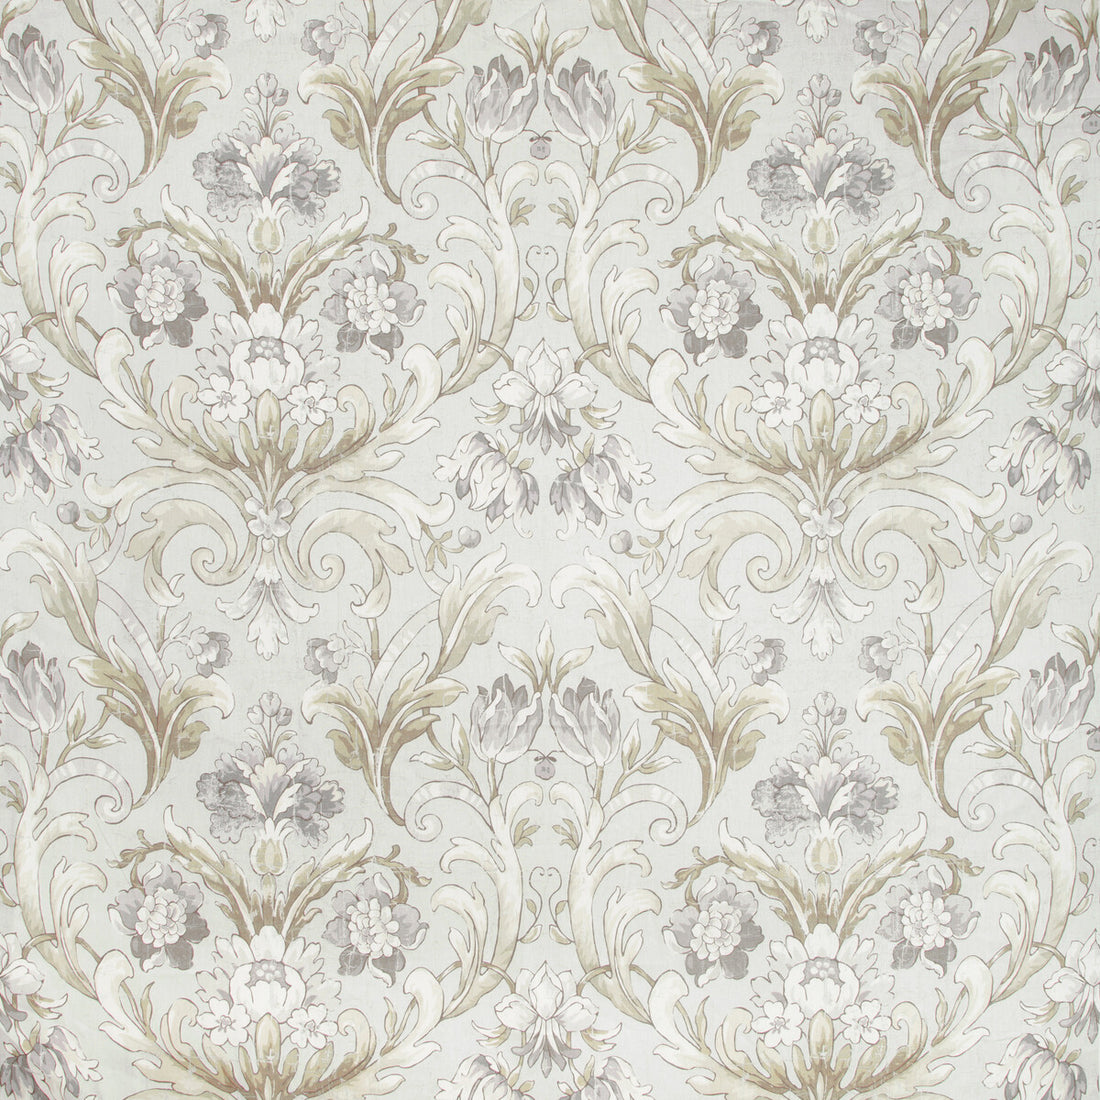 Avenham fabric in sandstone color - pattern AVENHAM.13.0 - by Kravet Basics in the Greenwich collection